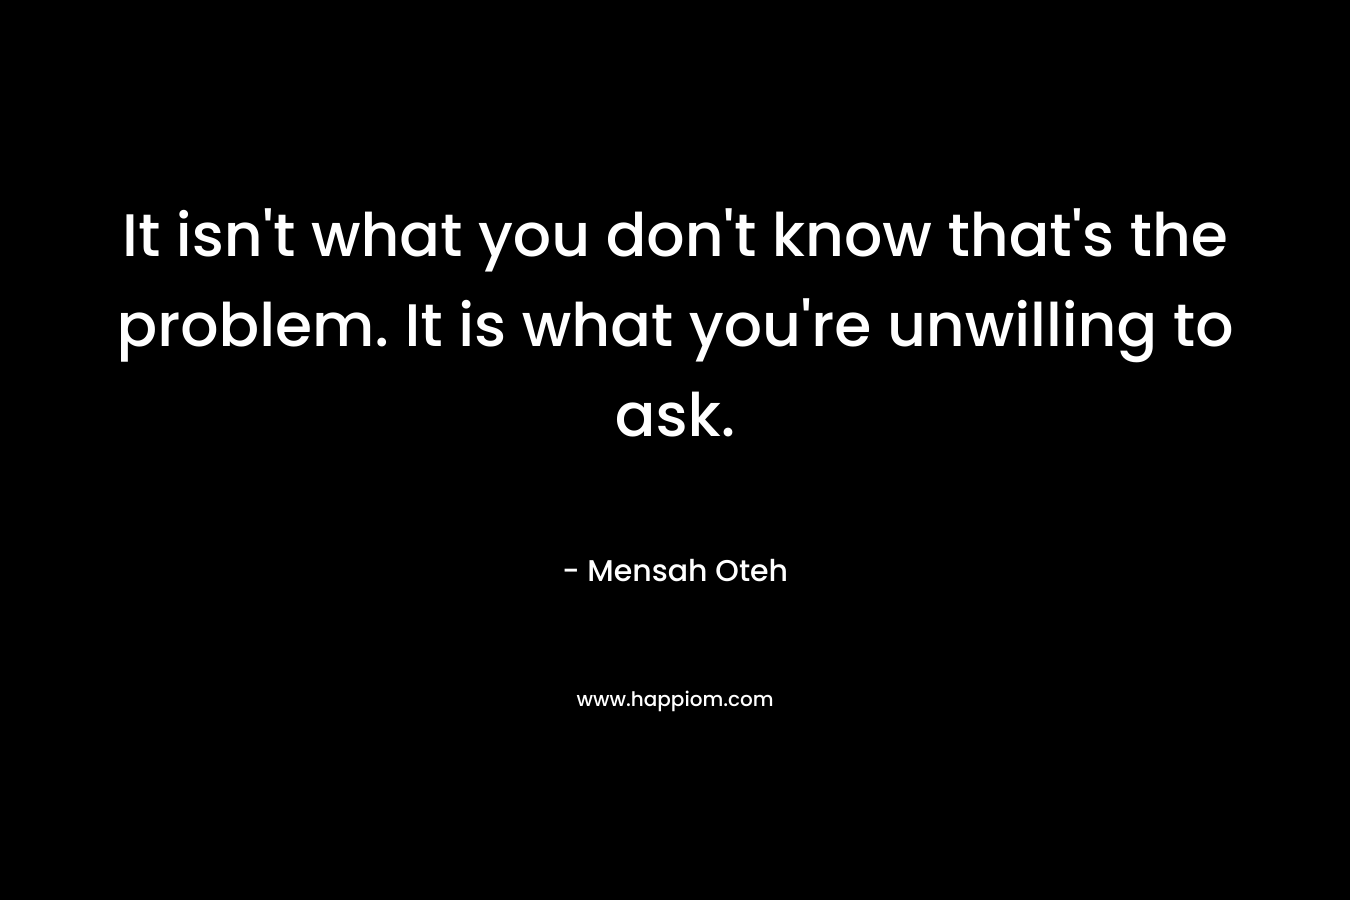 It isn't what you don't know that's the problem. It is what you're unwilling to ask.